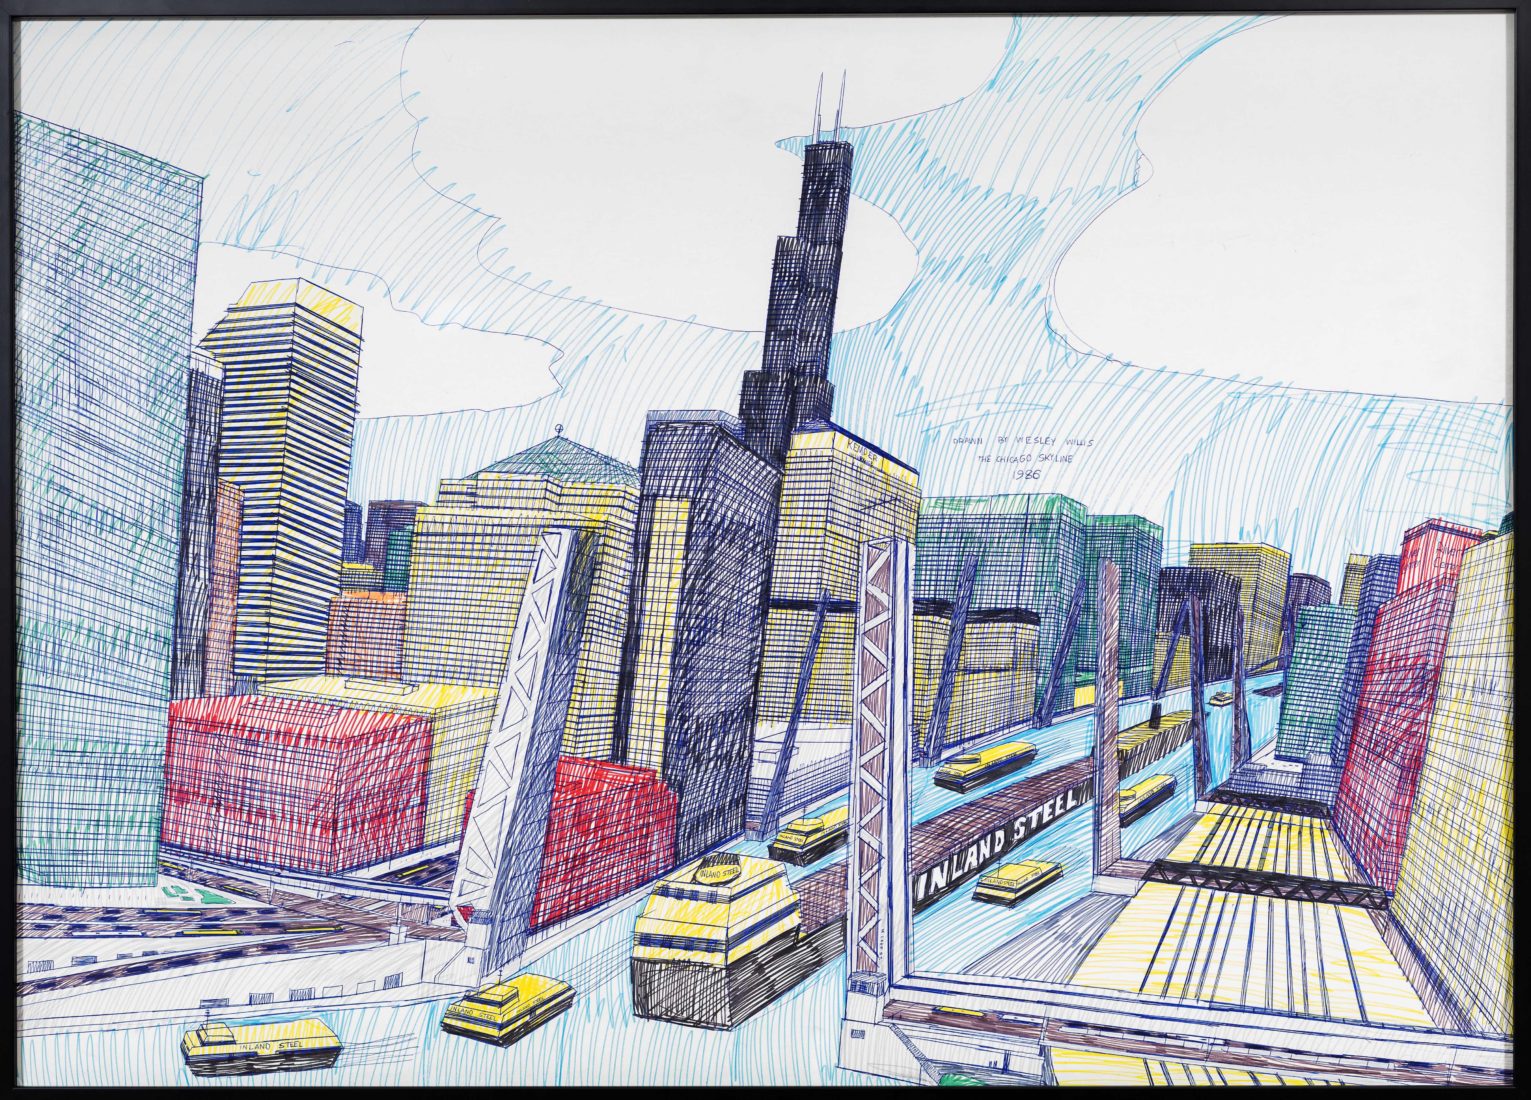 Wesley Willis, The Chicago Skyline, Sears Tower, Chicago River